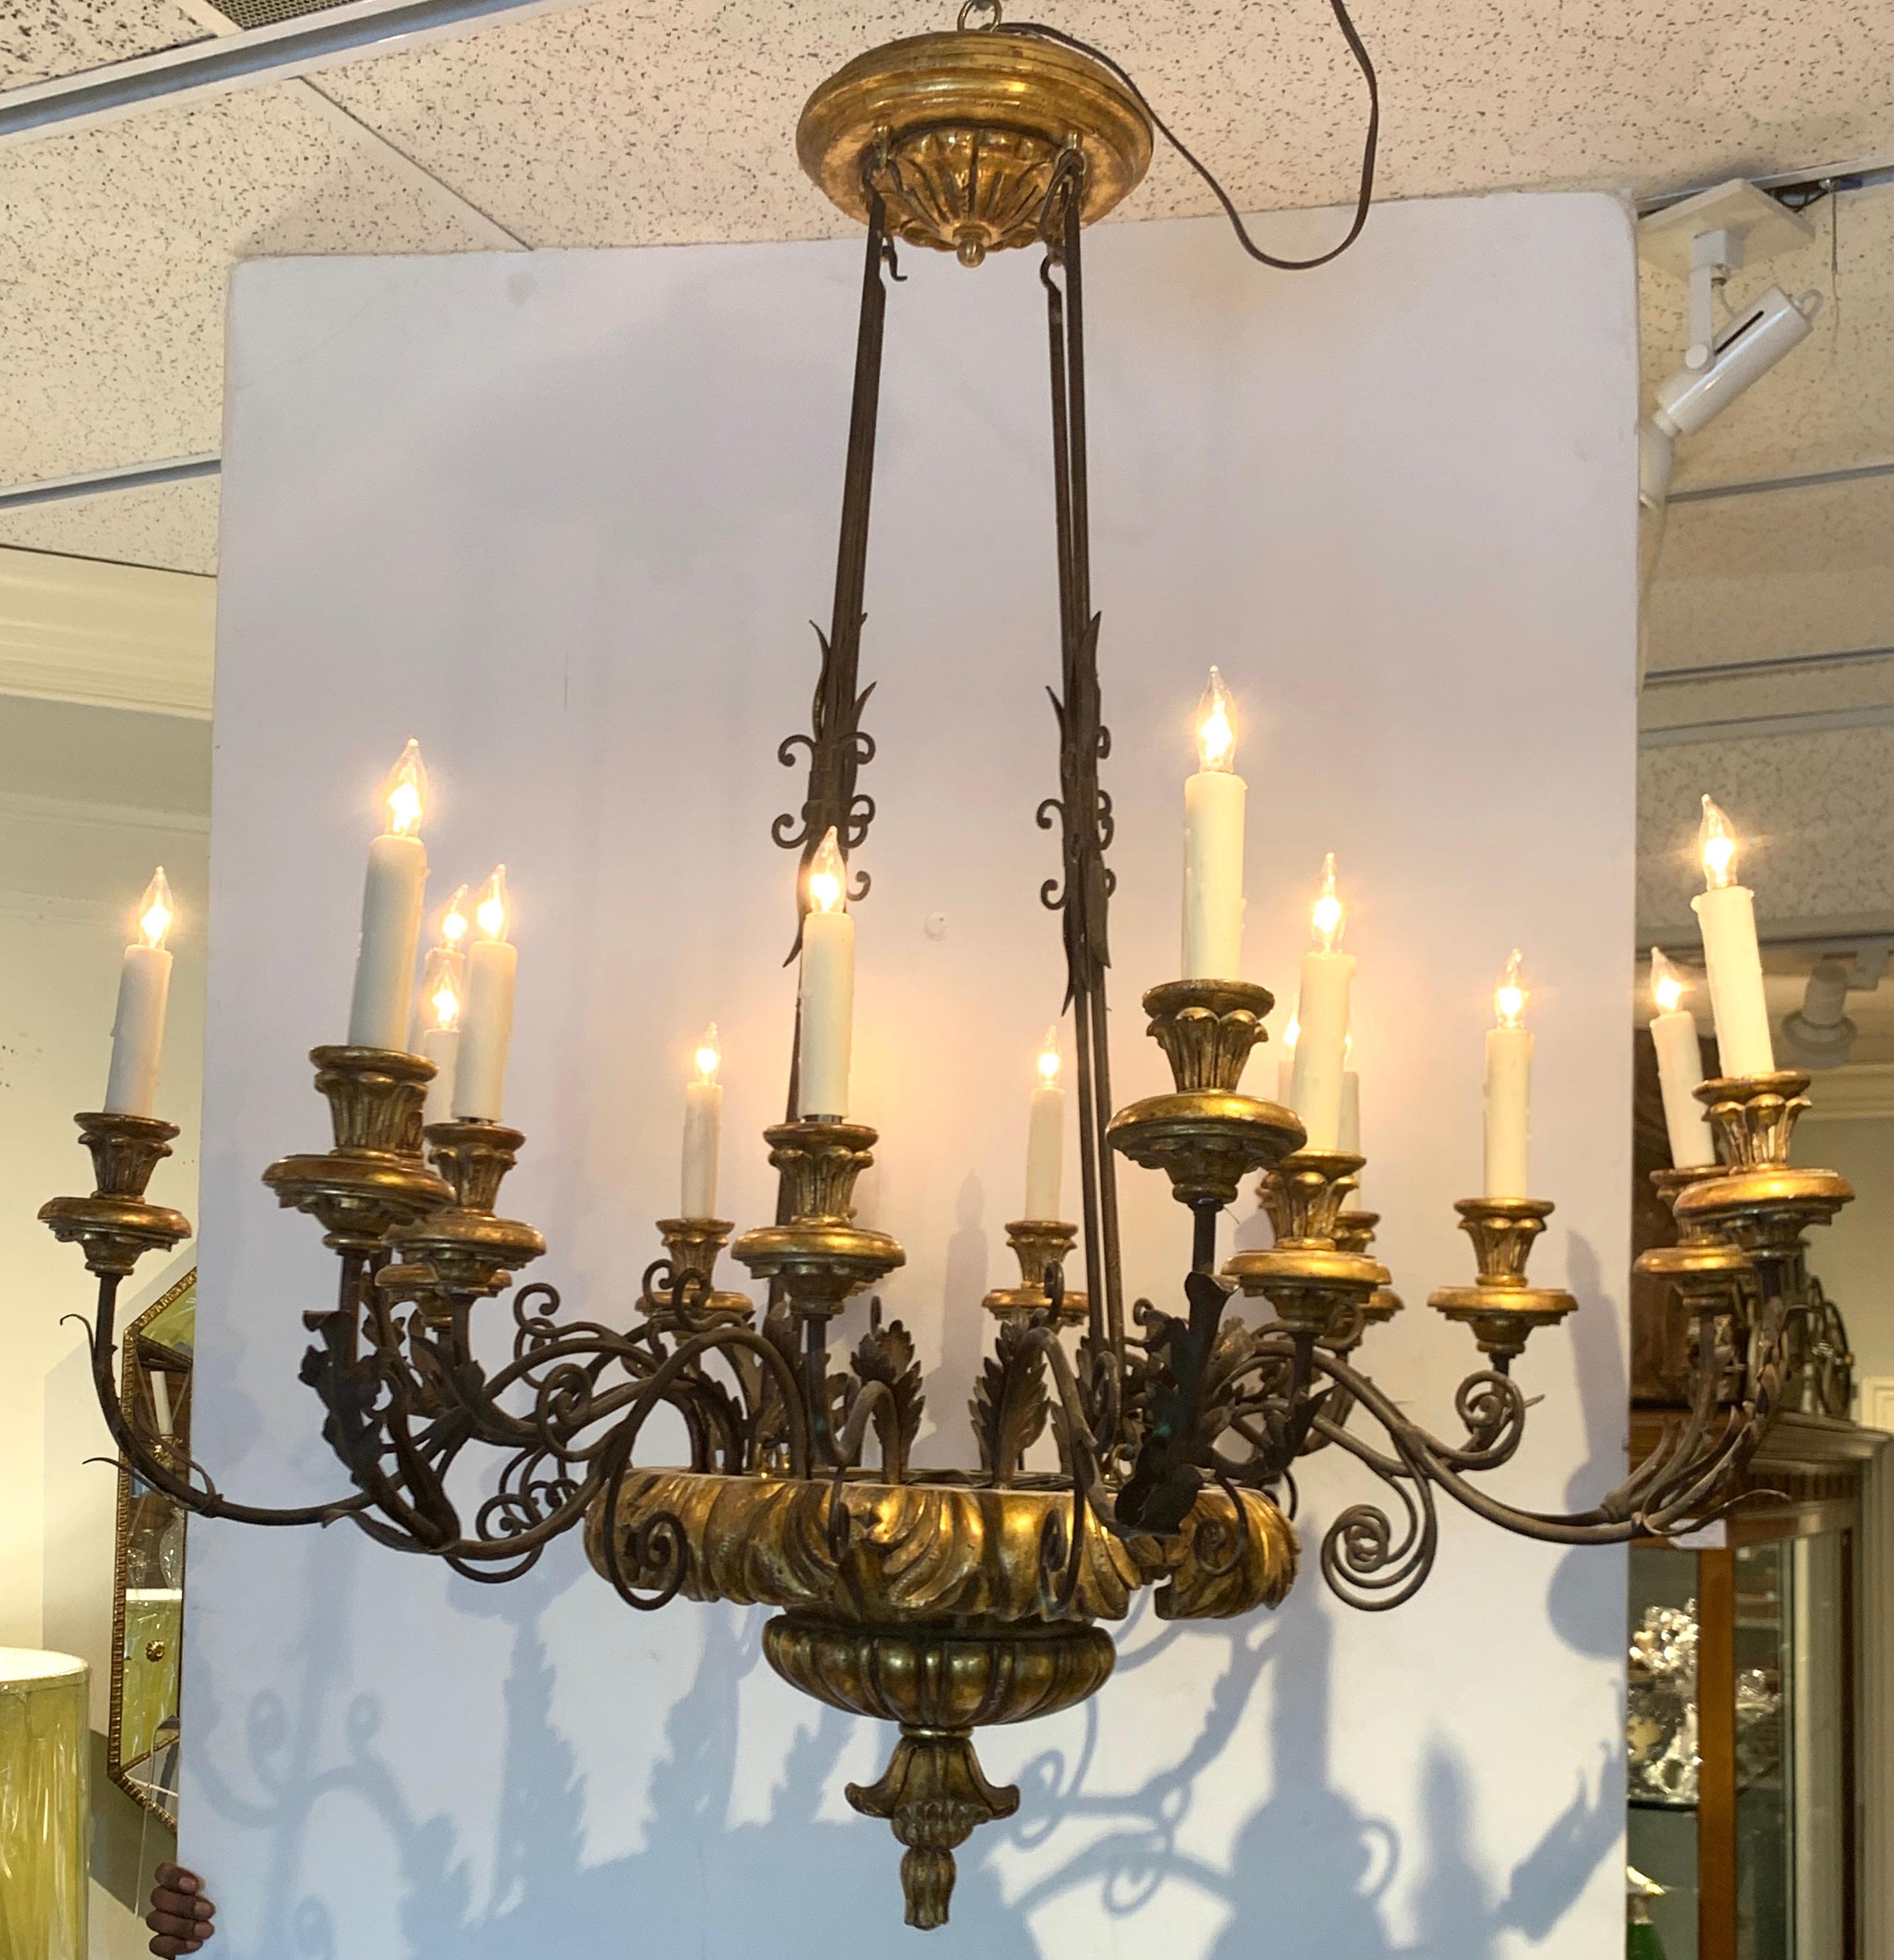 Italian neoclassic carved giltwood and iron 18-light chandelier, of circular form fitted with 18 candelabra bulbs. Great size and scale.